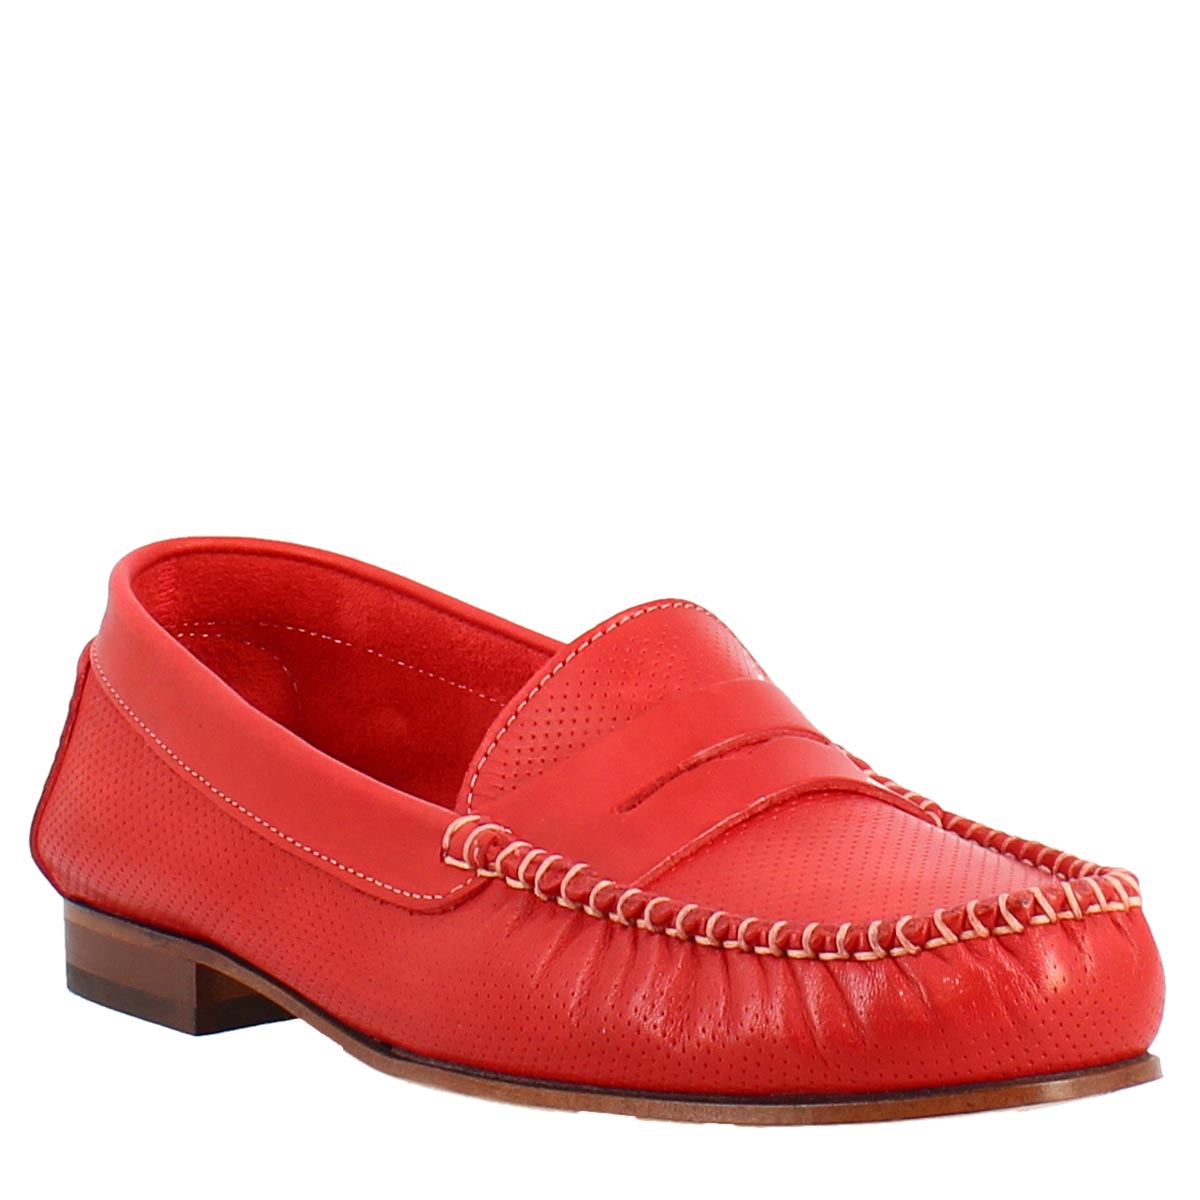 Handmade college loafers for women in red perforated leather 